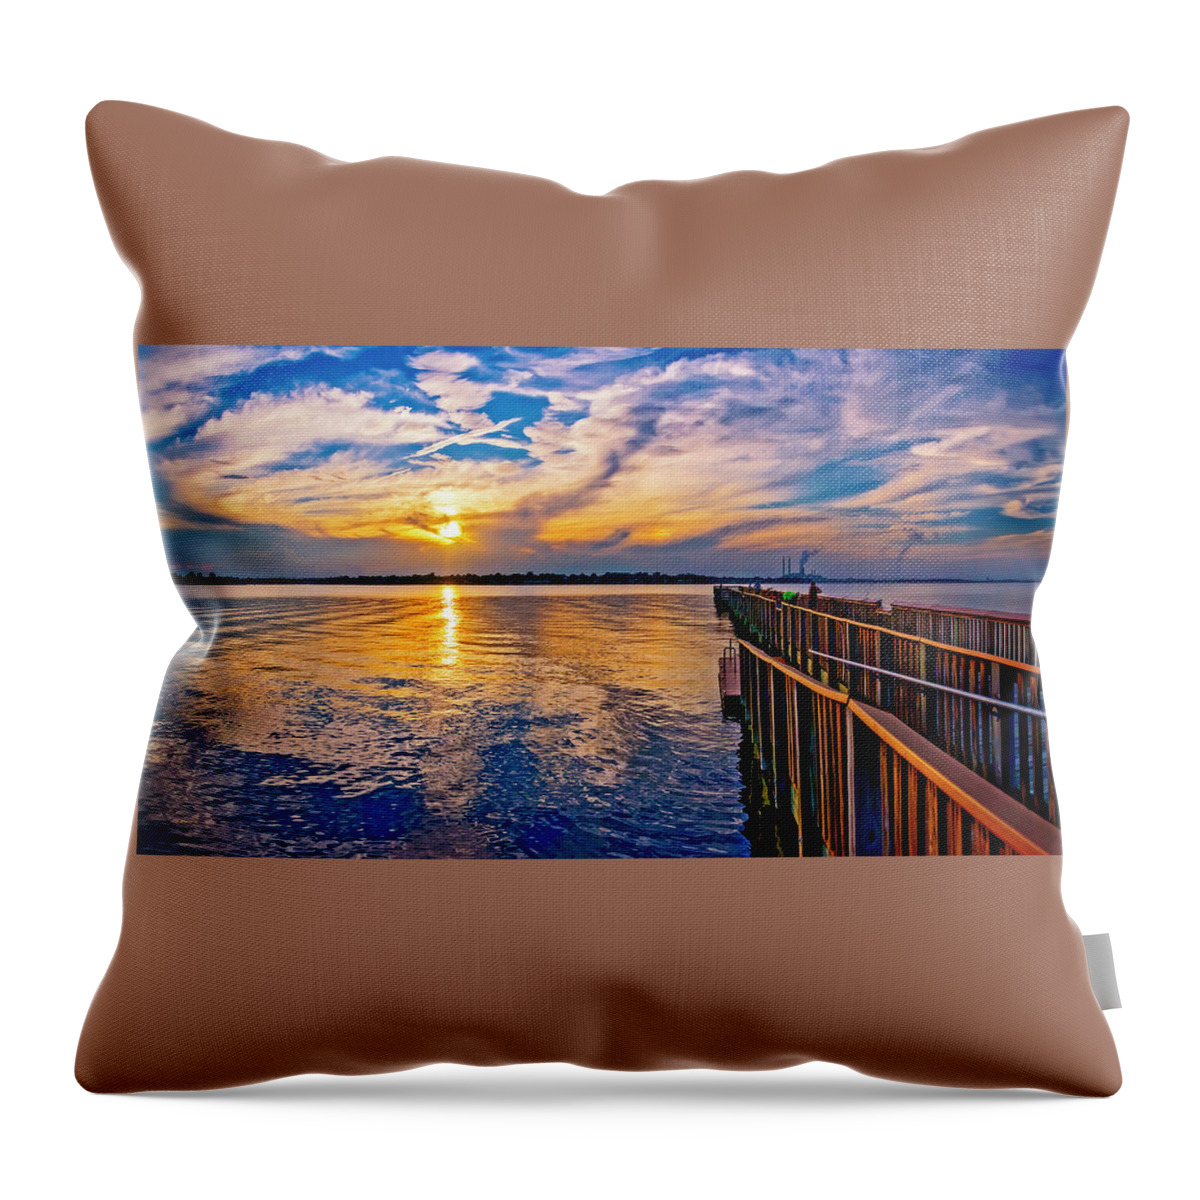 2d Throw Pillow featuring the photograph Sunset At The Pier Pano by Brian Wallace